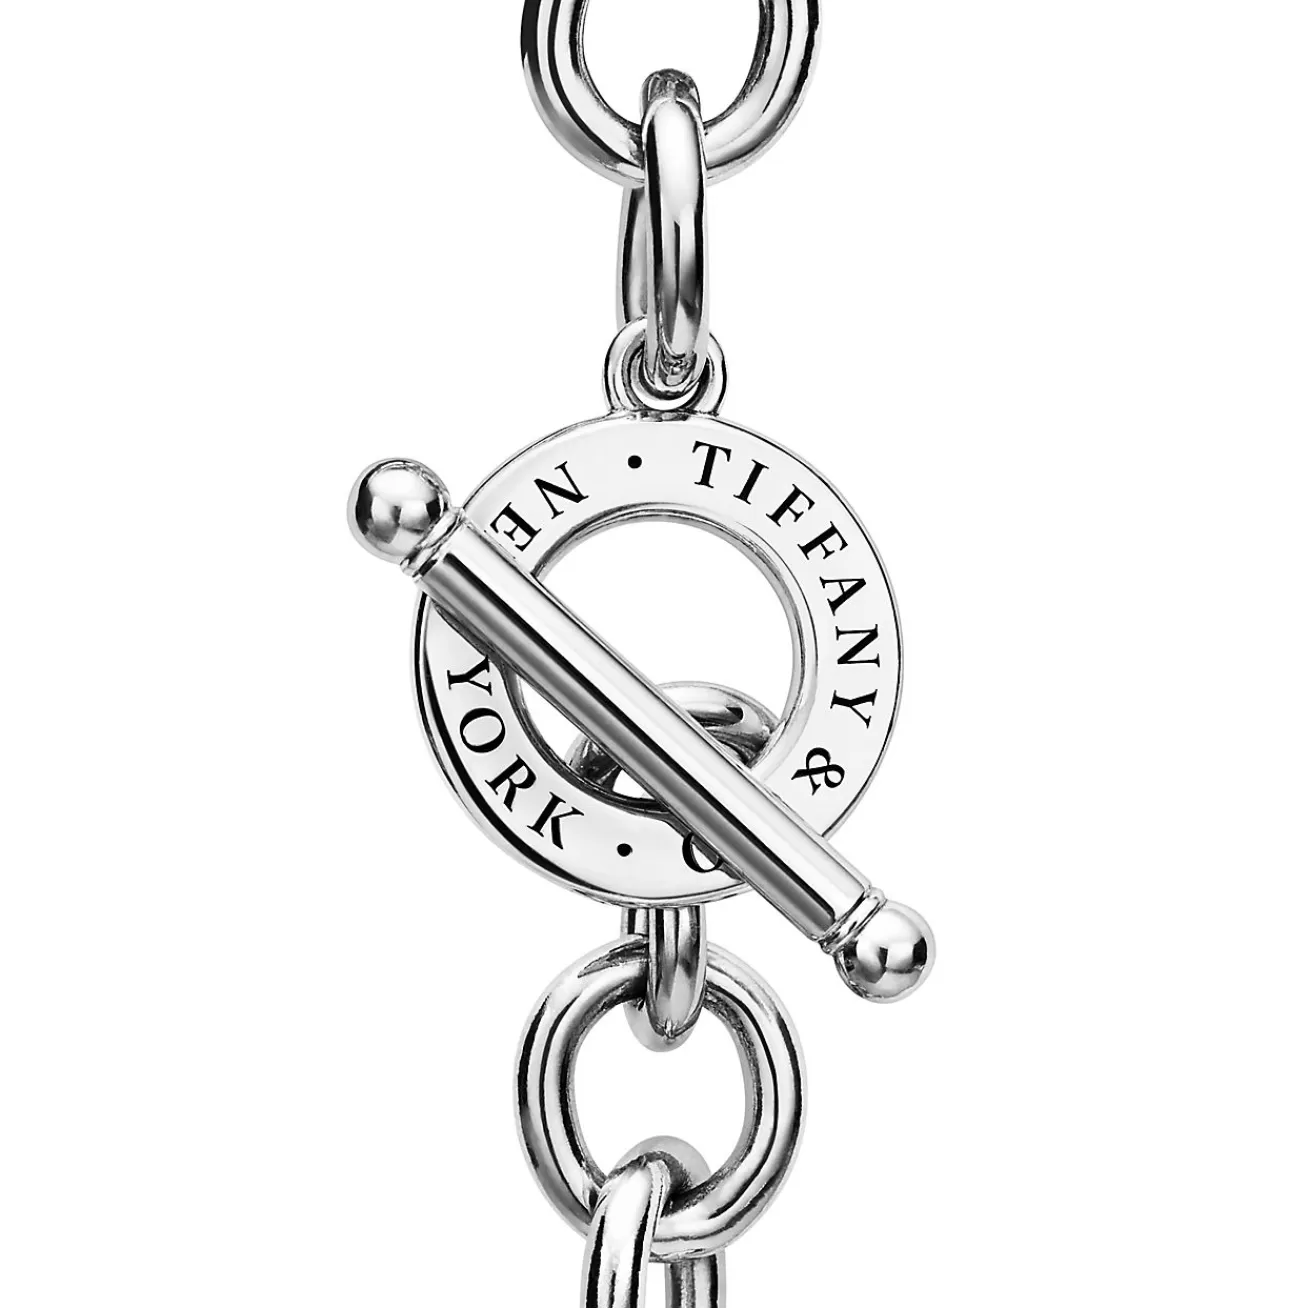 Tiffany & Co. Return to Tiffany® Full Heart Toggle Bracelet in Sterling Silver | ^ Bracelets | Gifts for Her